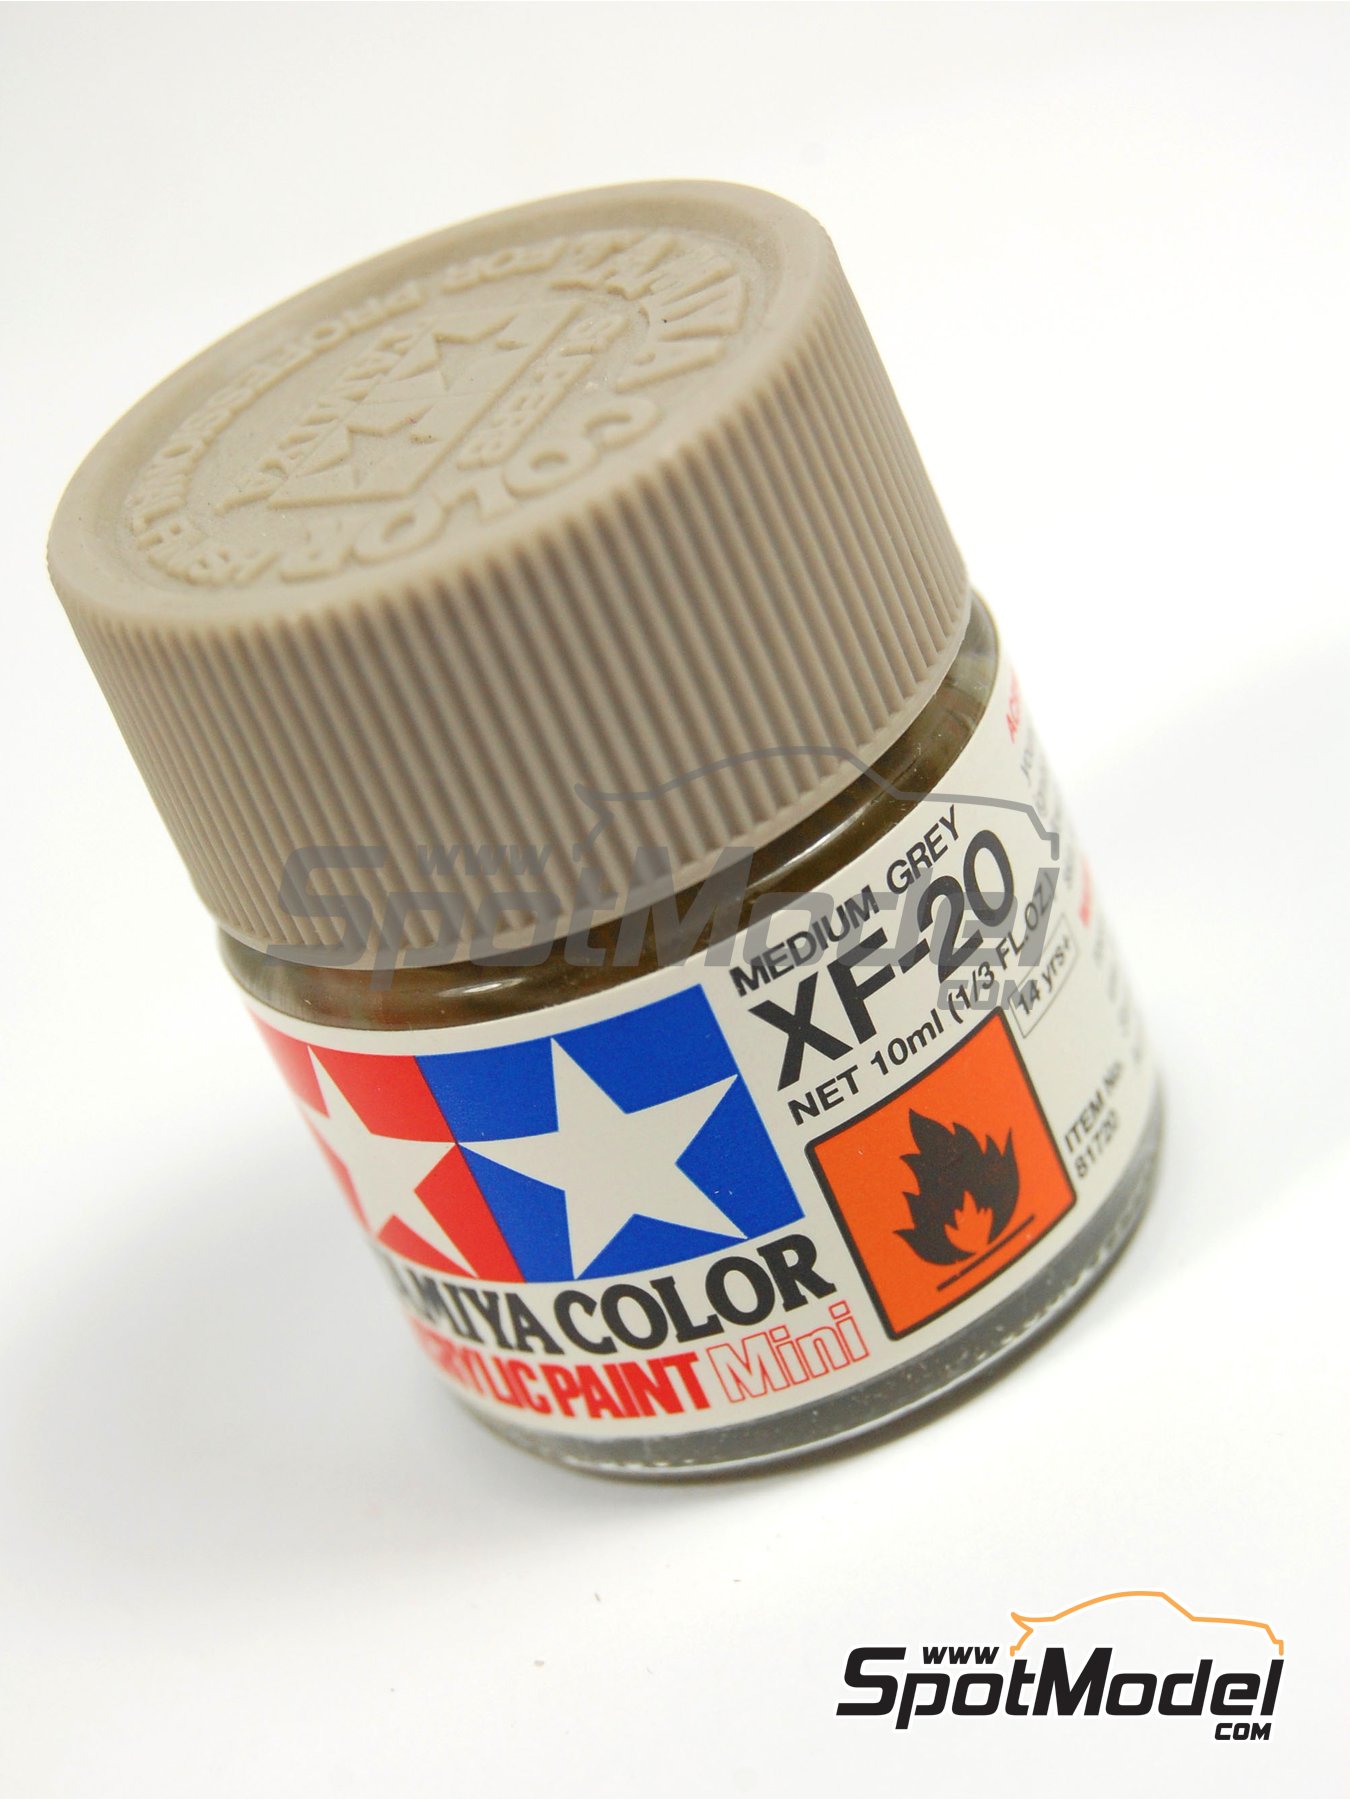 Retarder for Tamiya paints? - Modelling Discussion - Large Scale